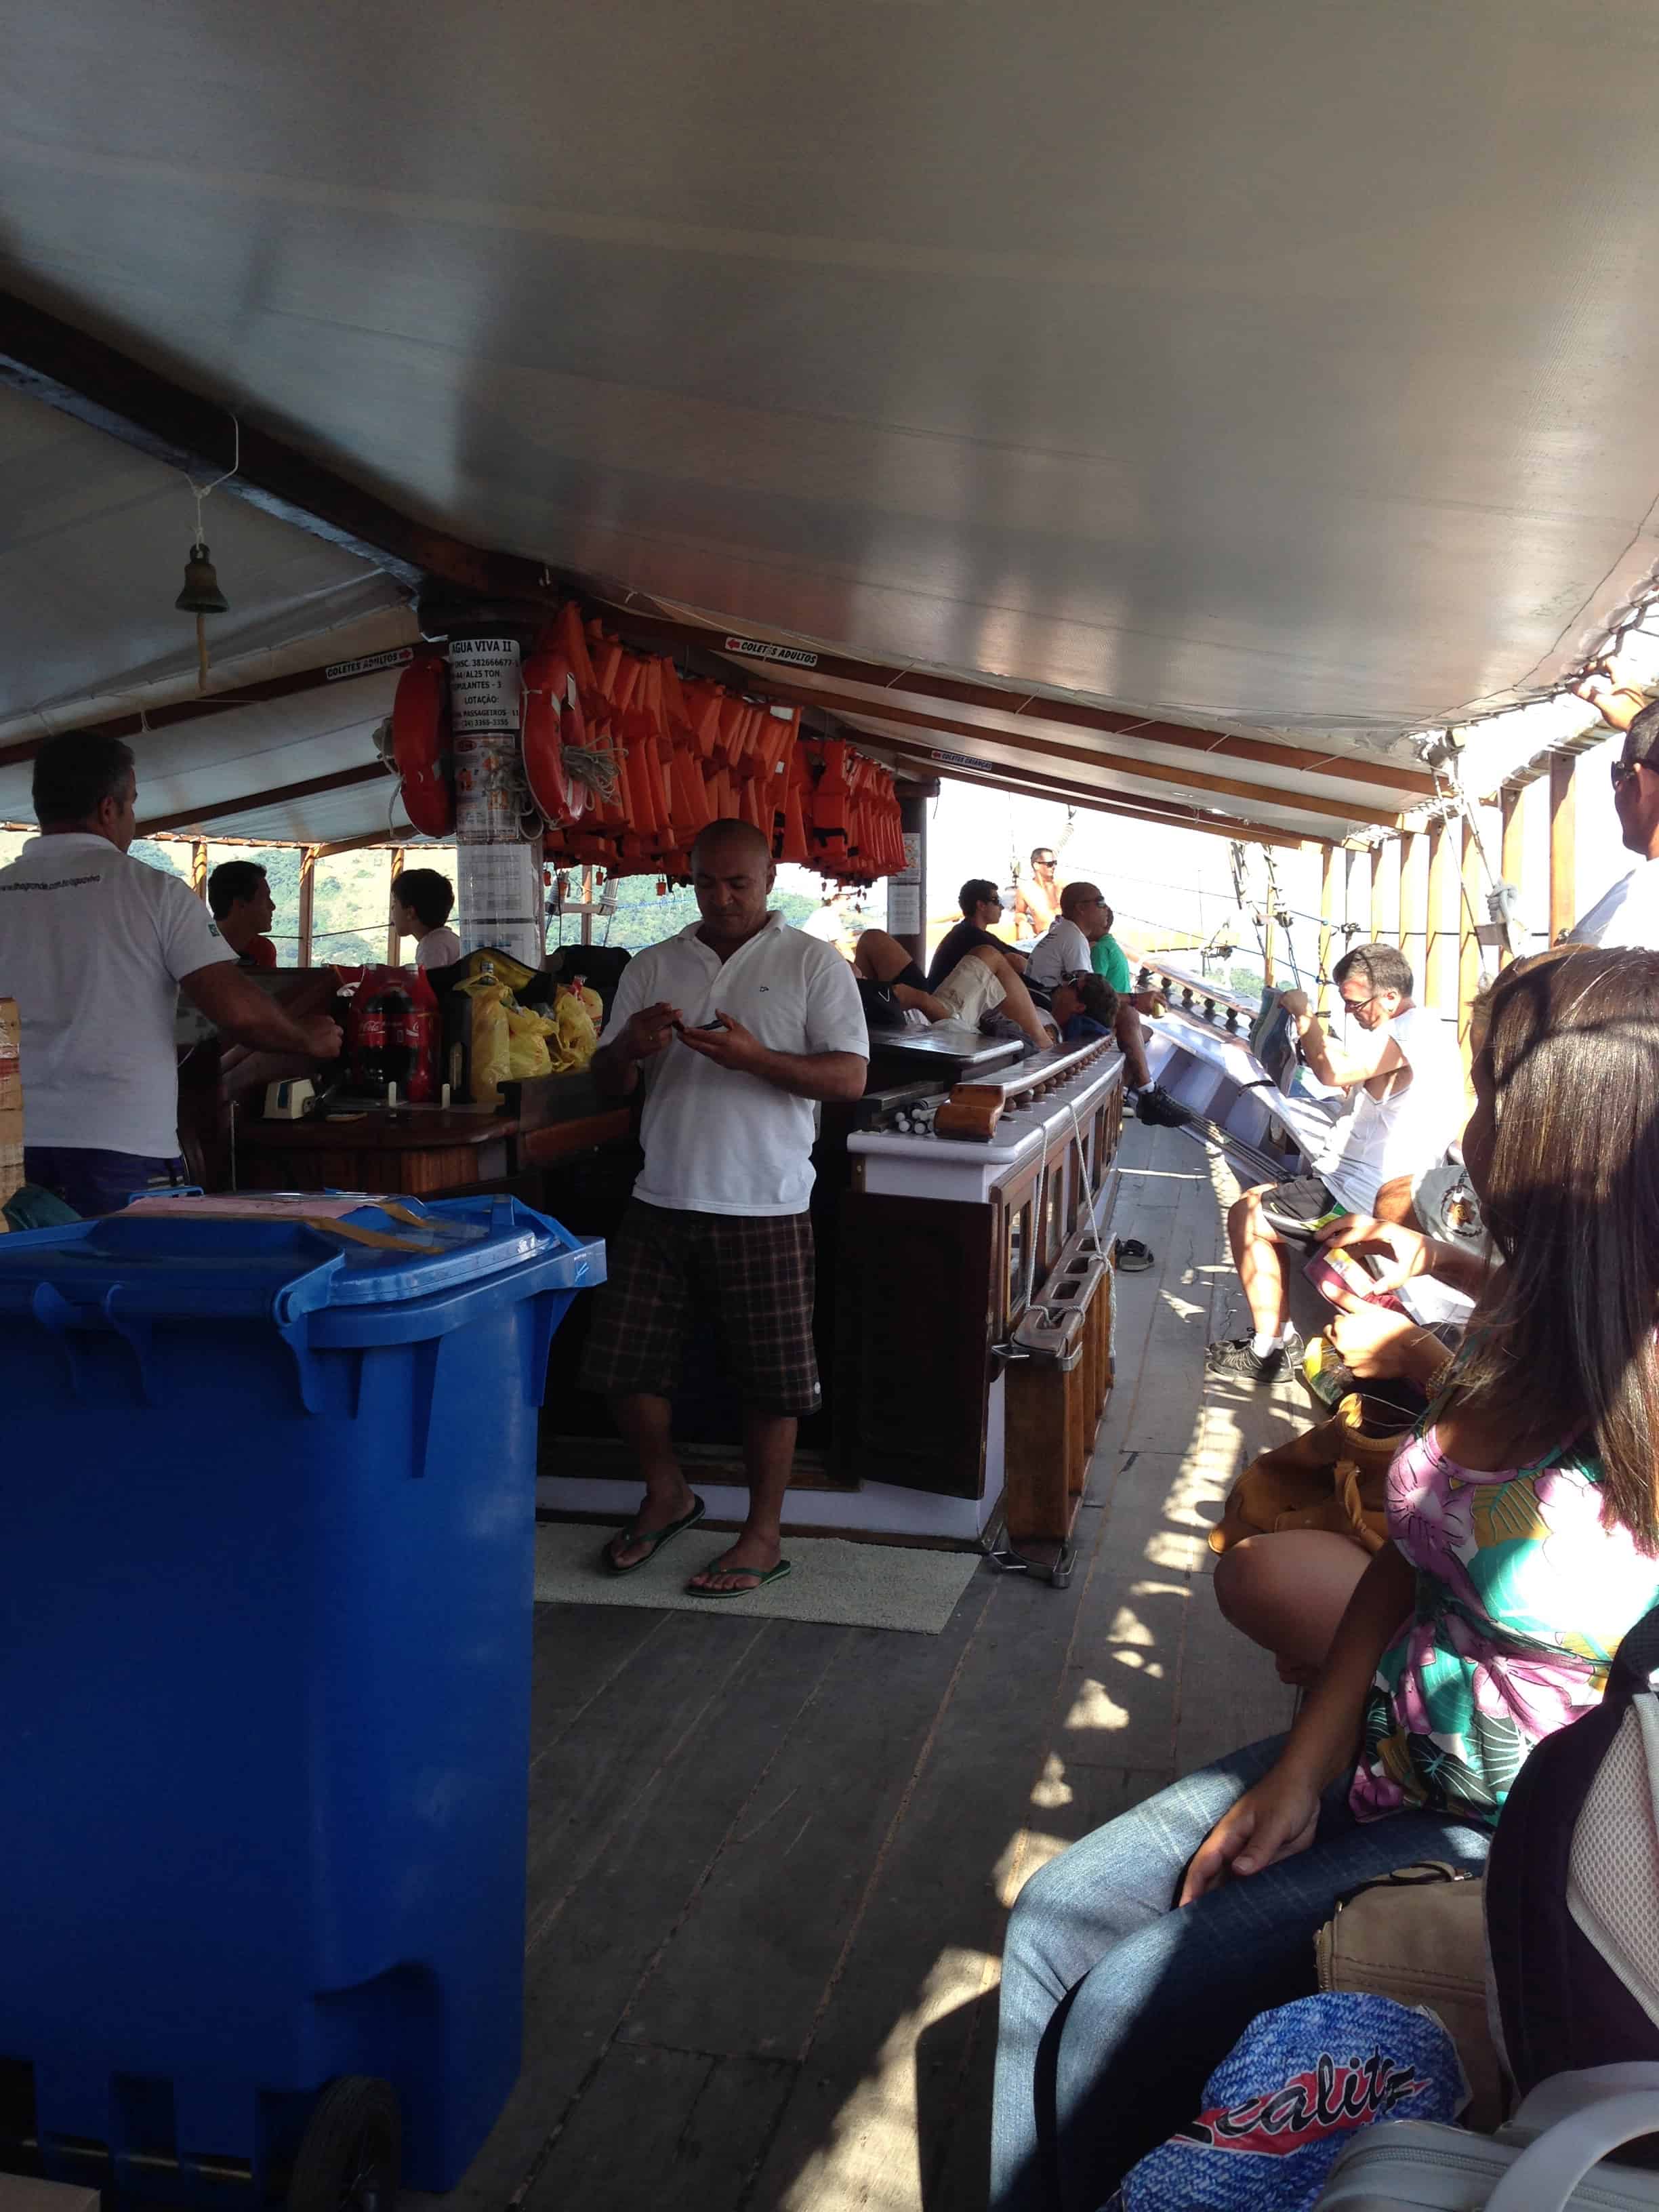 The boat ride from Angra dos Reis to Ilha Grande, Brazil